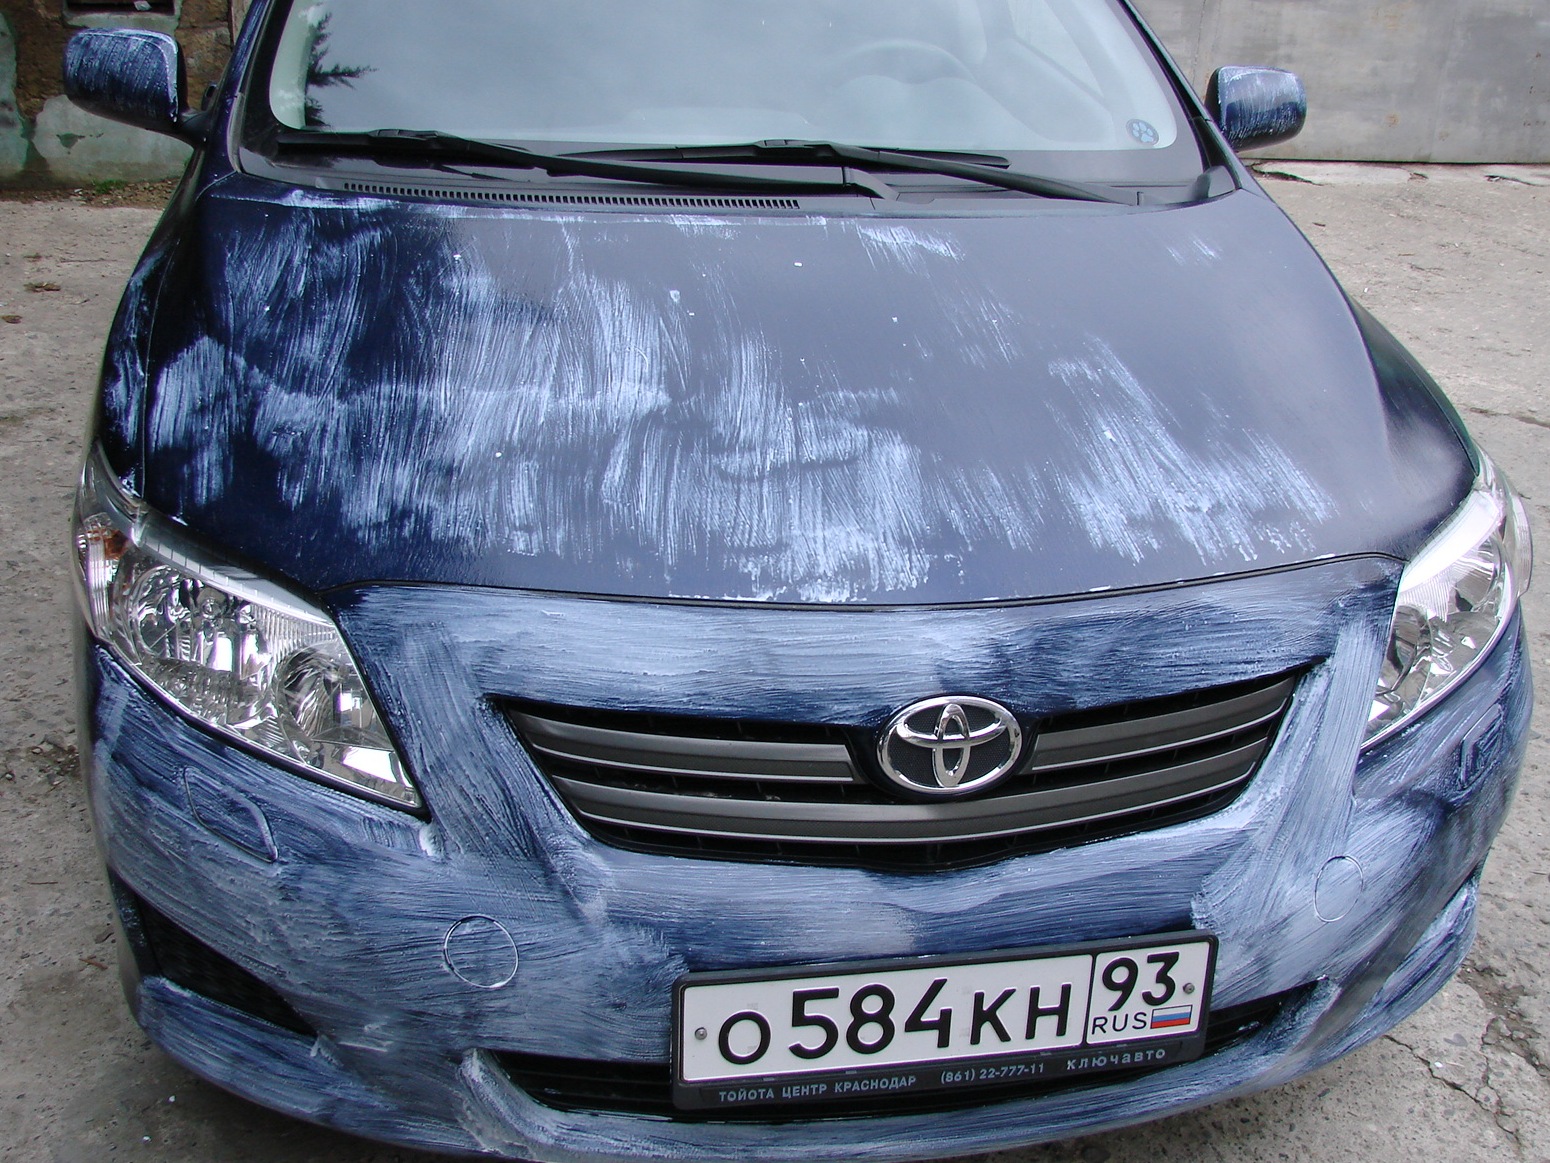 I recommend - tested on myself  liquid cover part 2 photos included - Toyota Corolla 16 L 2007